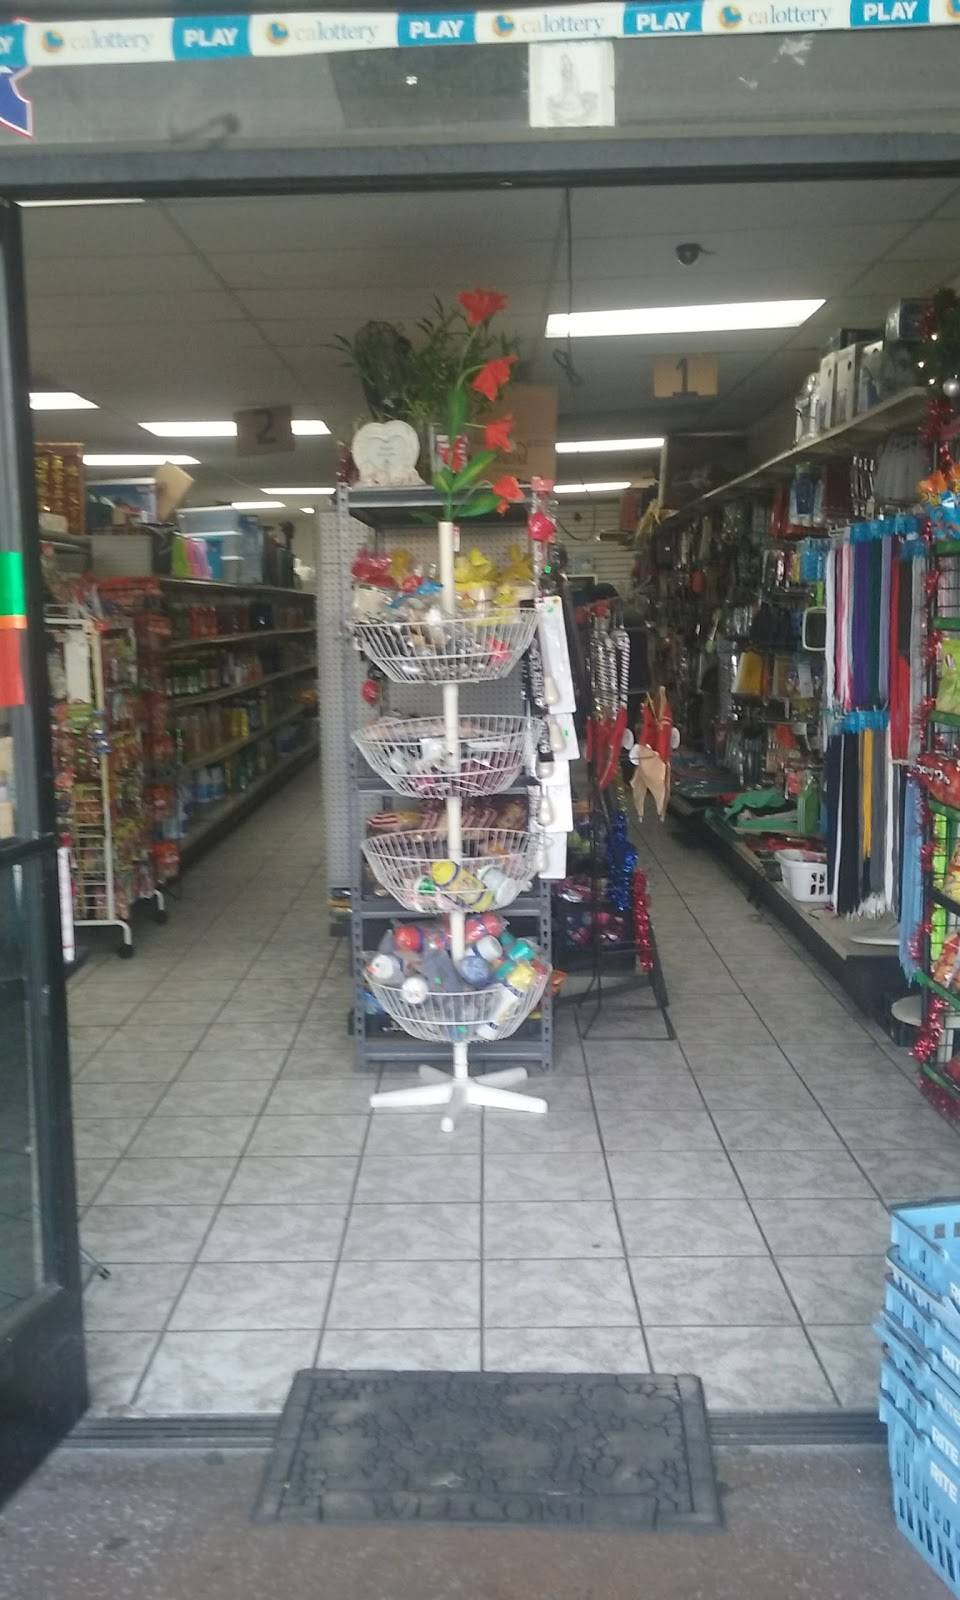 99 Cents Outlet | 1041 Prairie Ave # 14, Inglewood, CA 90301, USA | Phone: (310) 671-7999